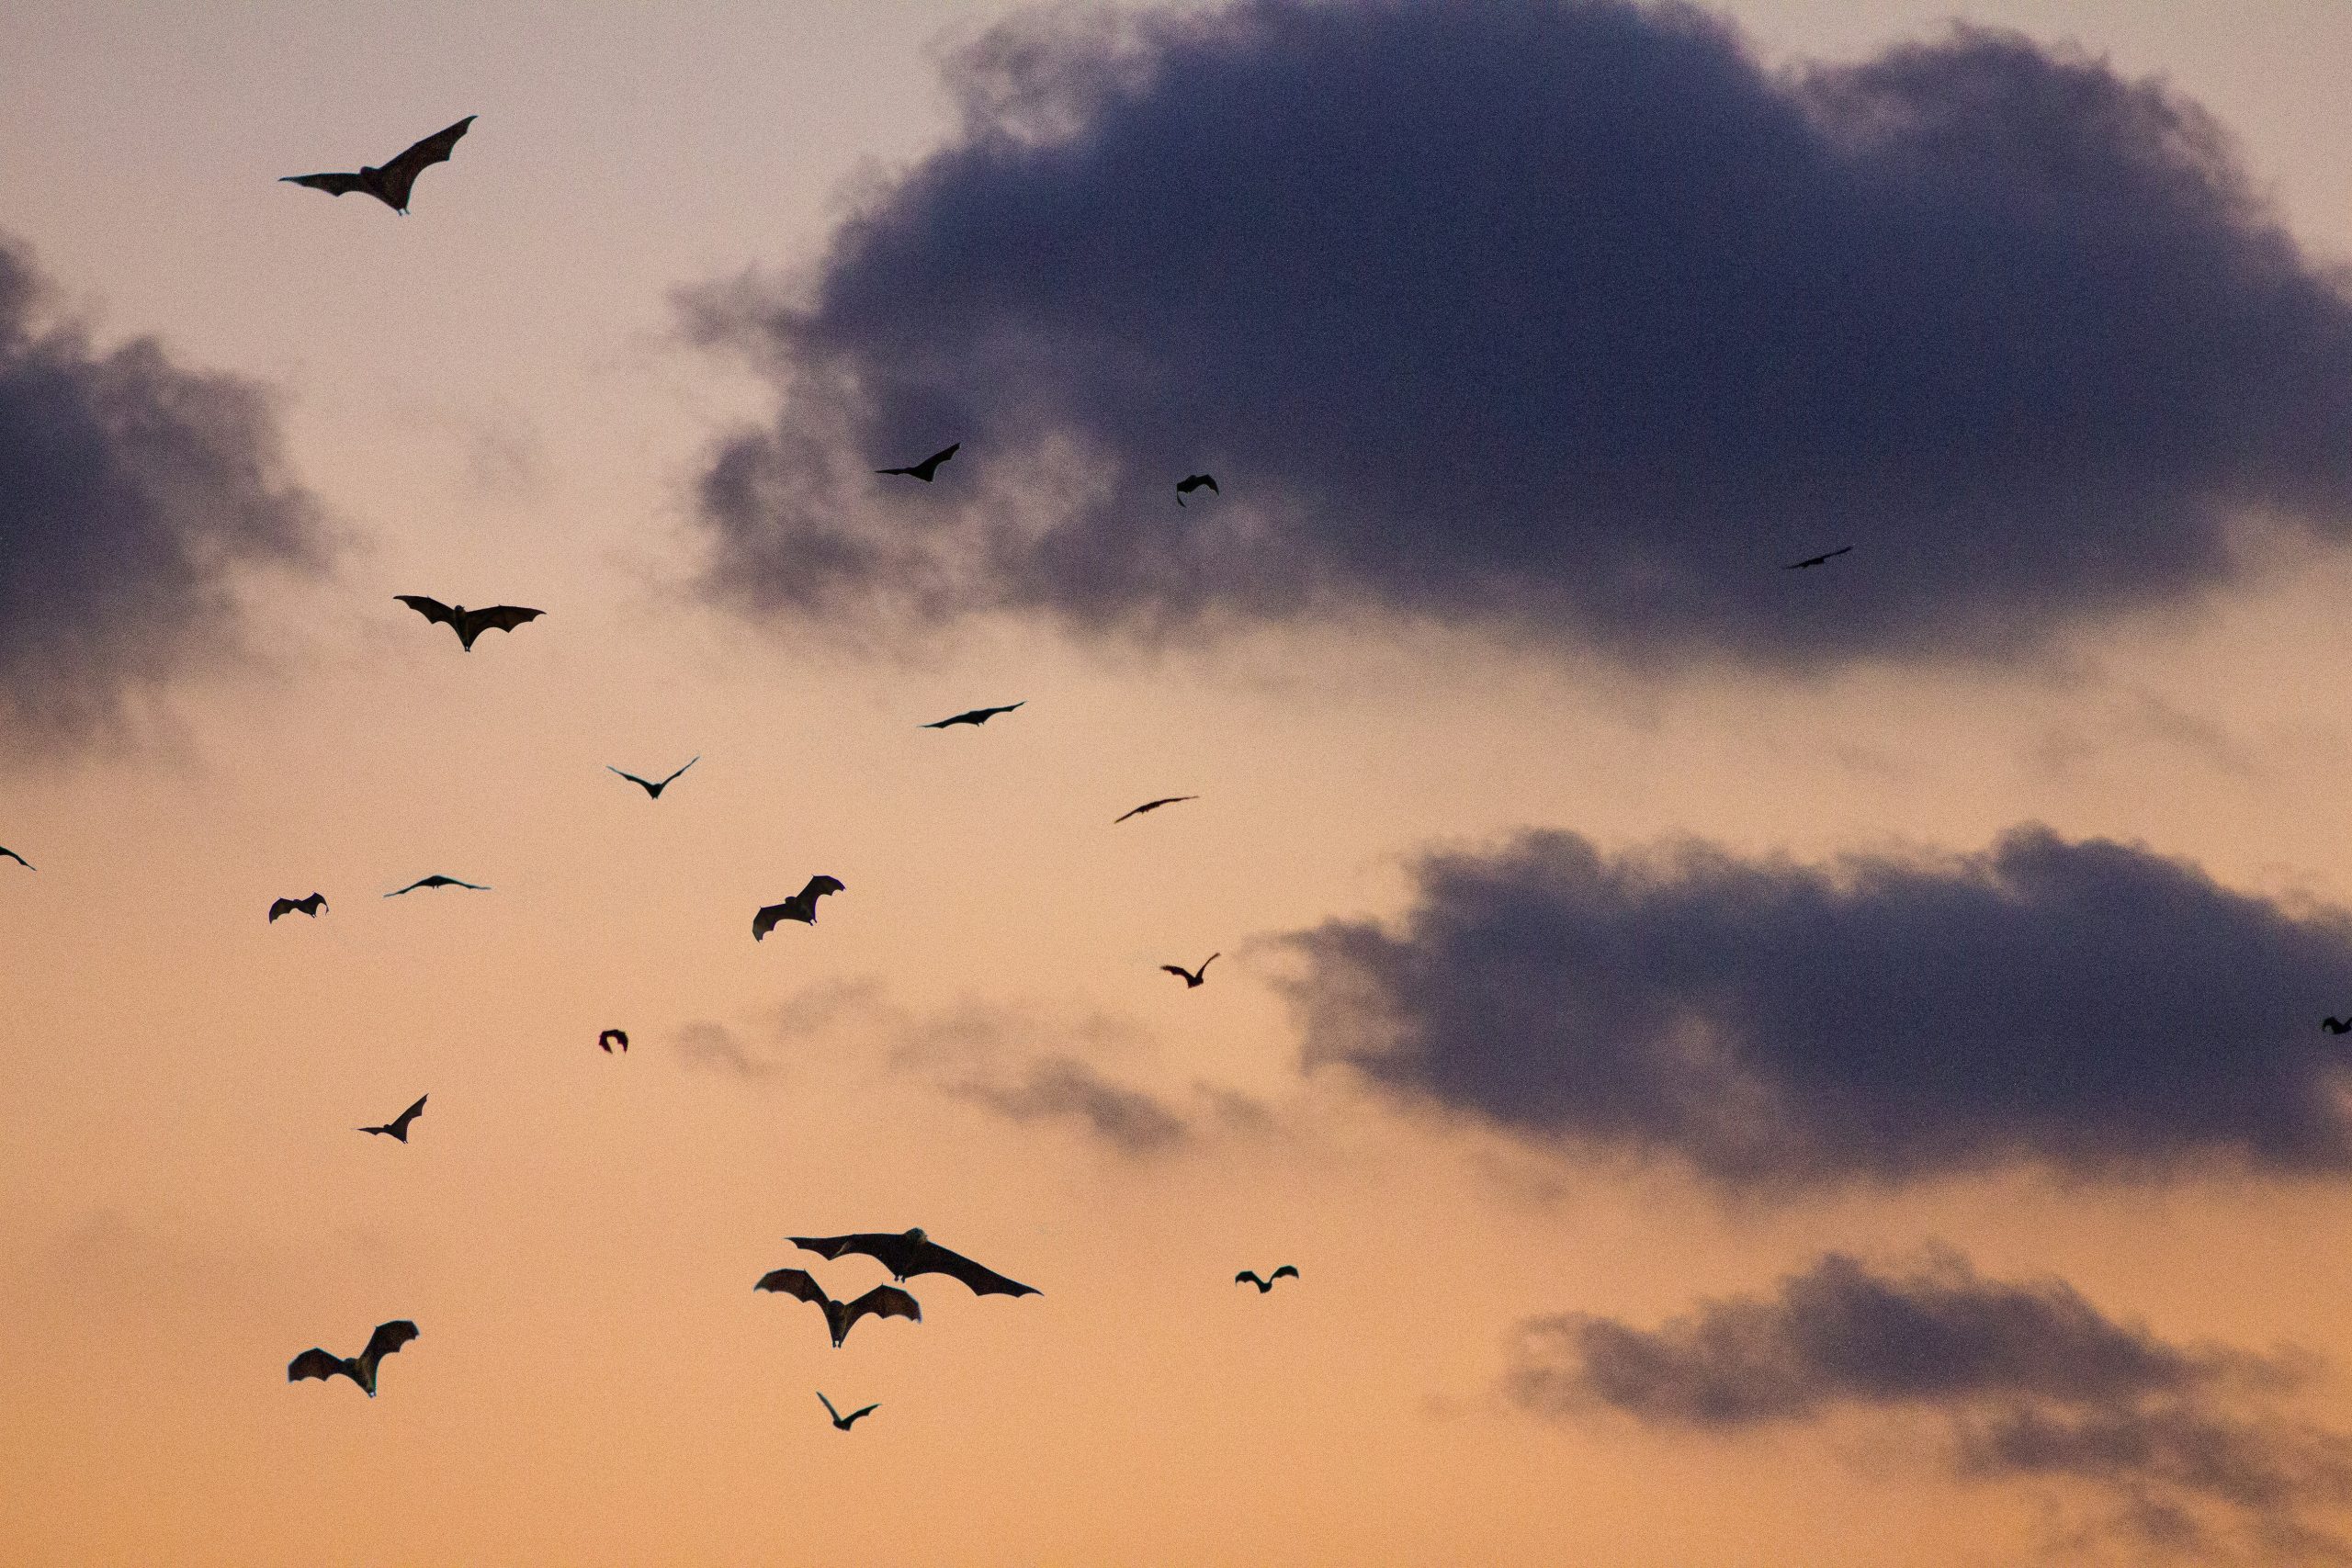 A swarm of bats flying at sunset